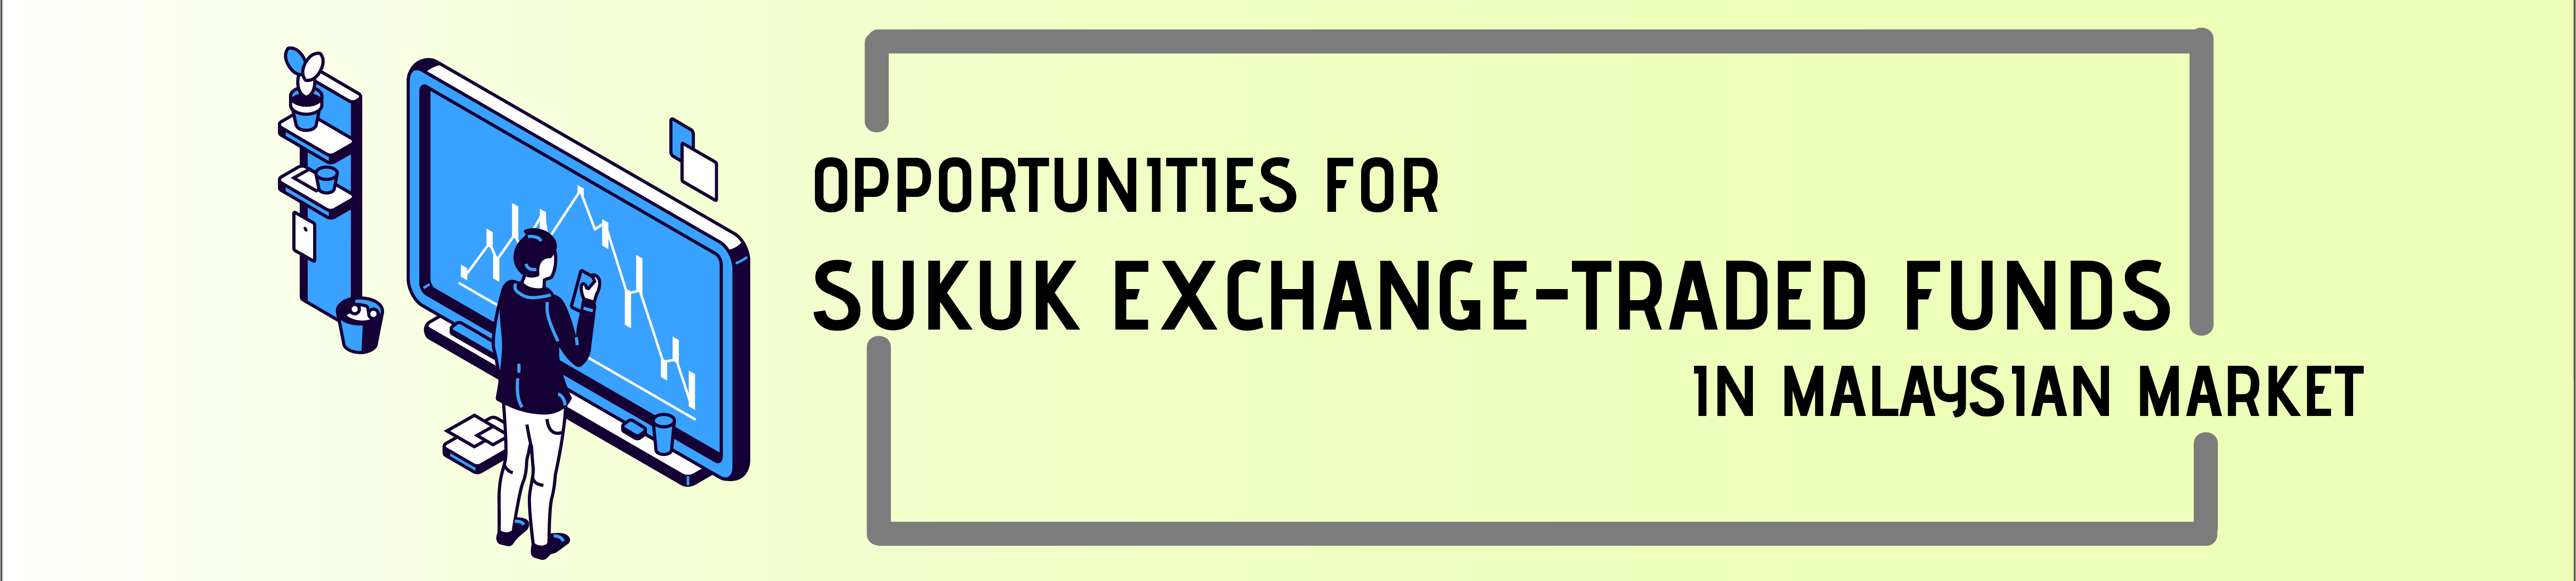 Opportunities For Sukuk Exchange-Traded Funds In Malaysian Market